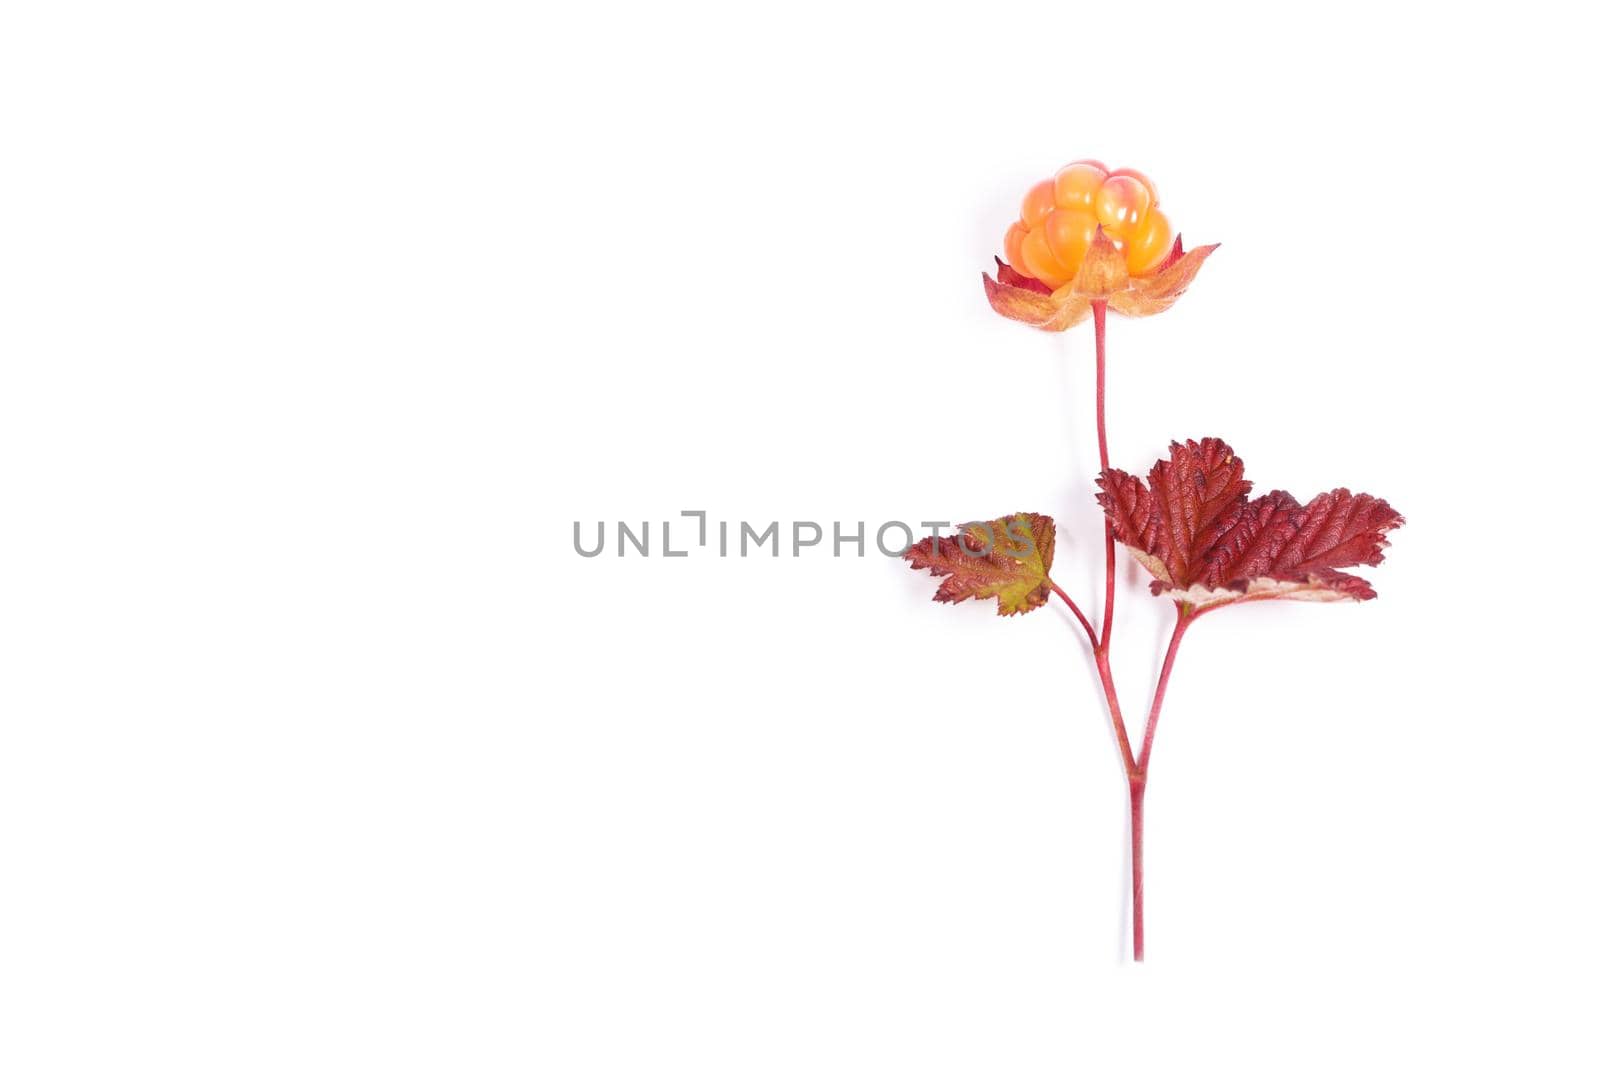 Cloudberries with leaves isolated on a white background by Estival